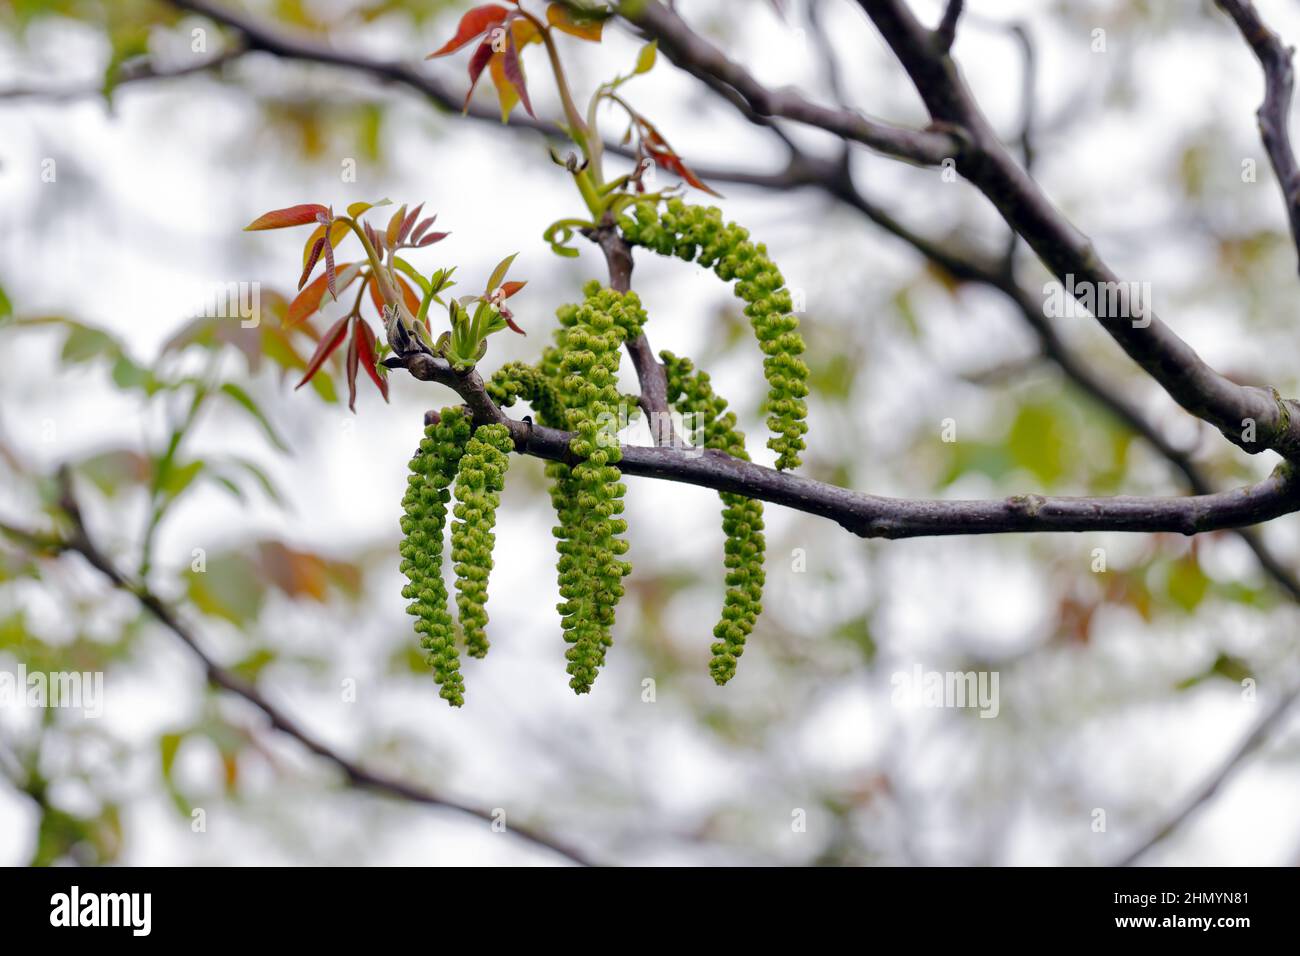 Walnut tree in blossom, male flowers on branches. Early spring. Stock Photo